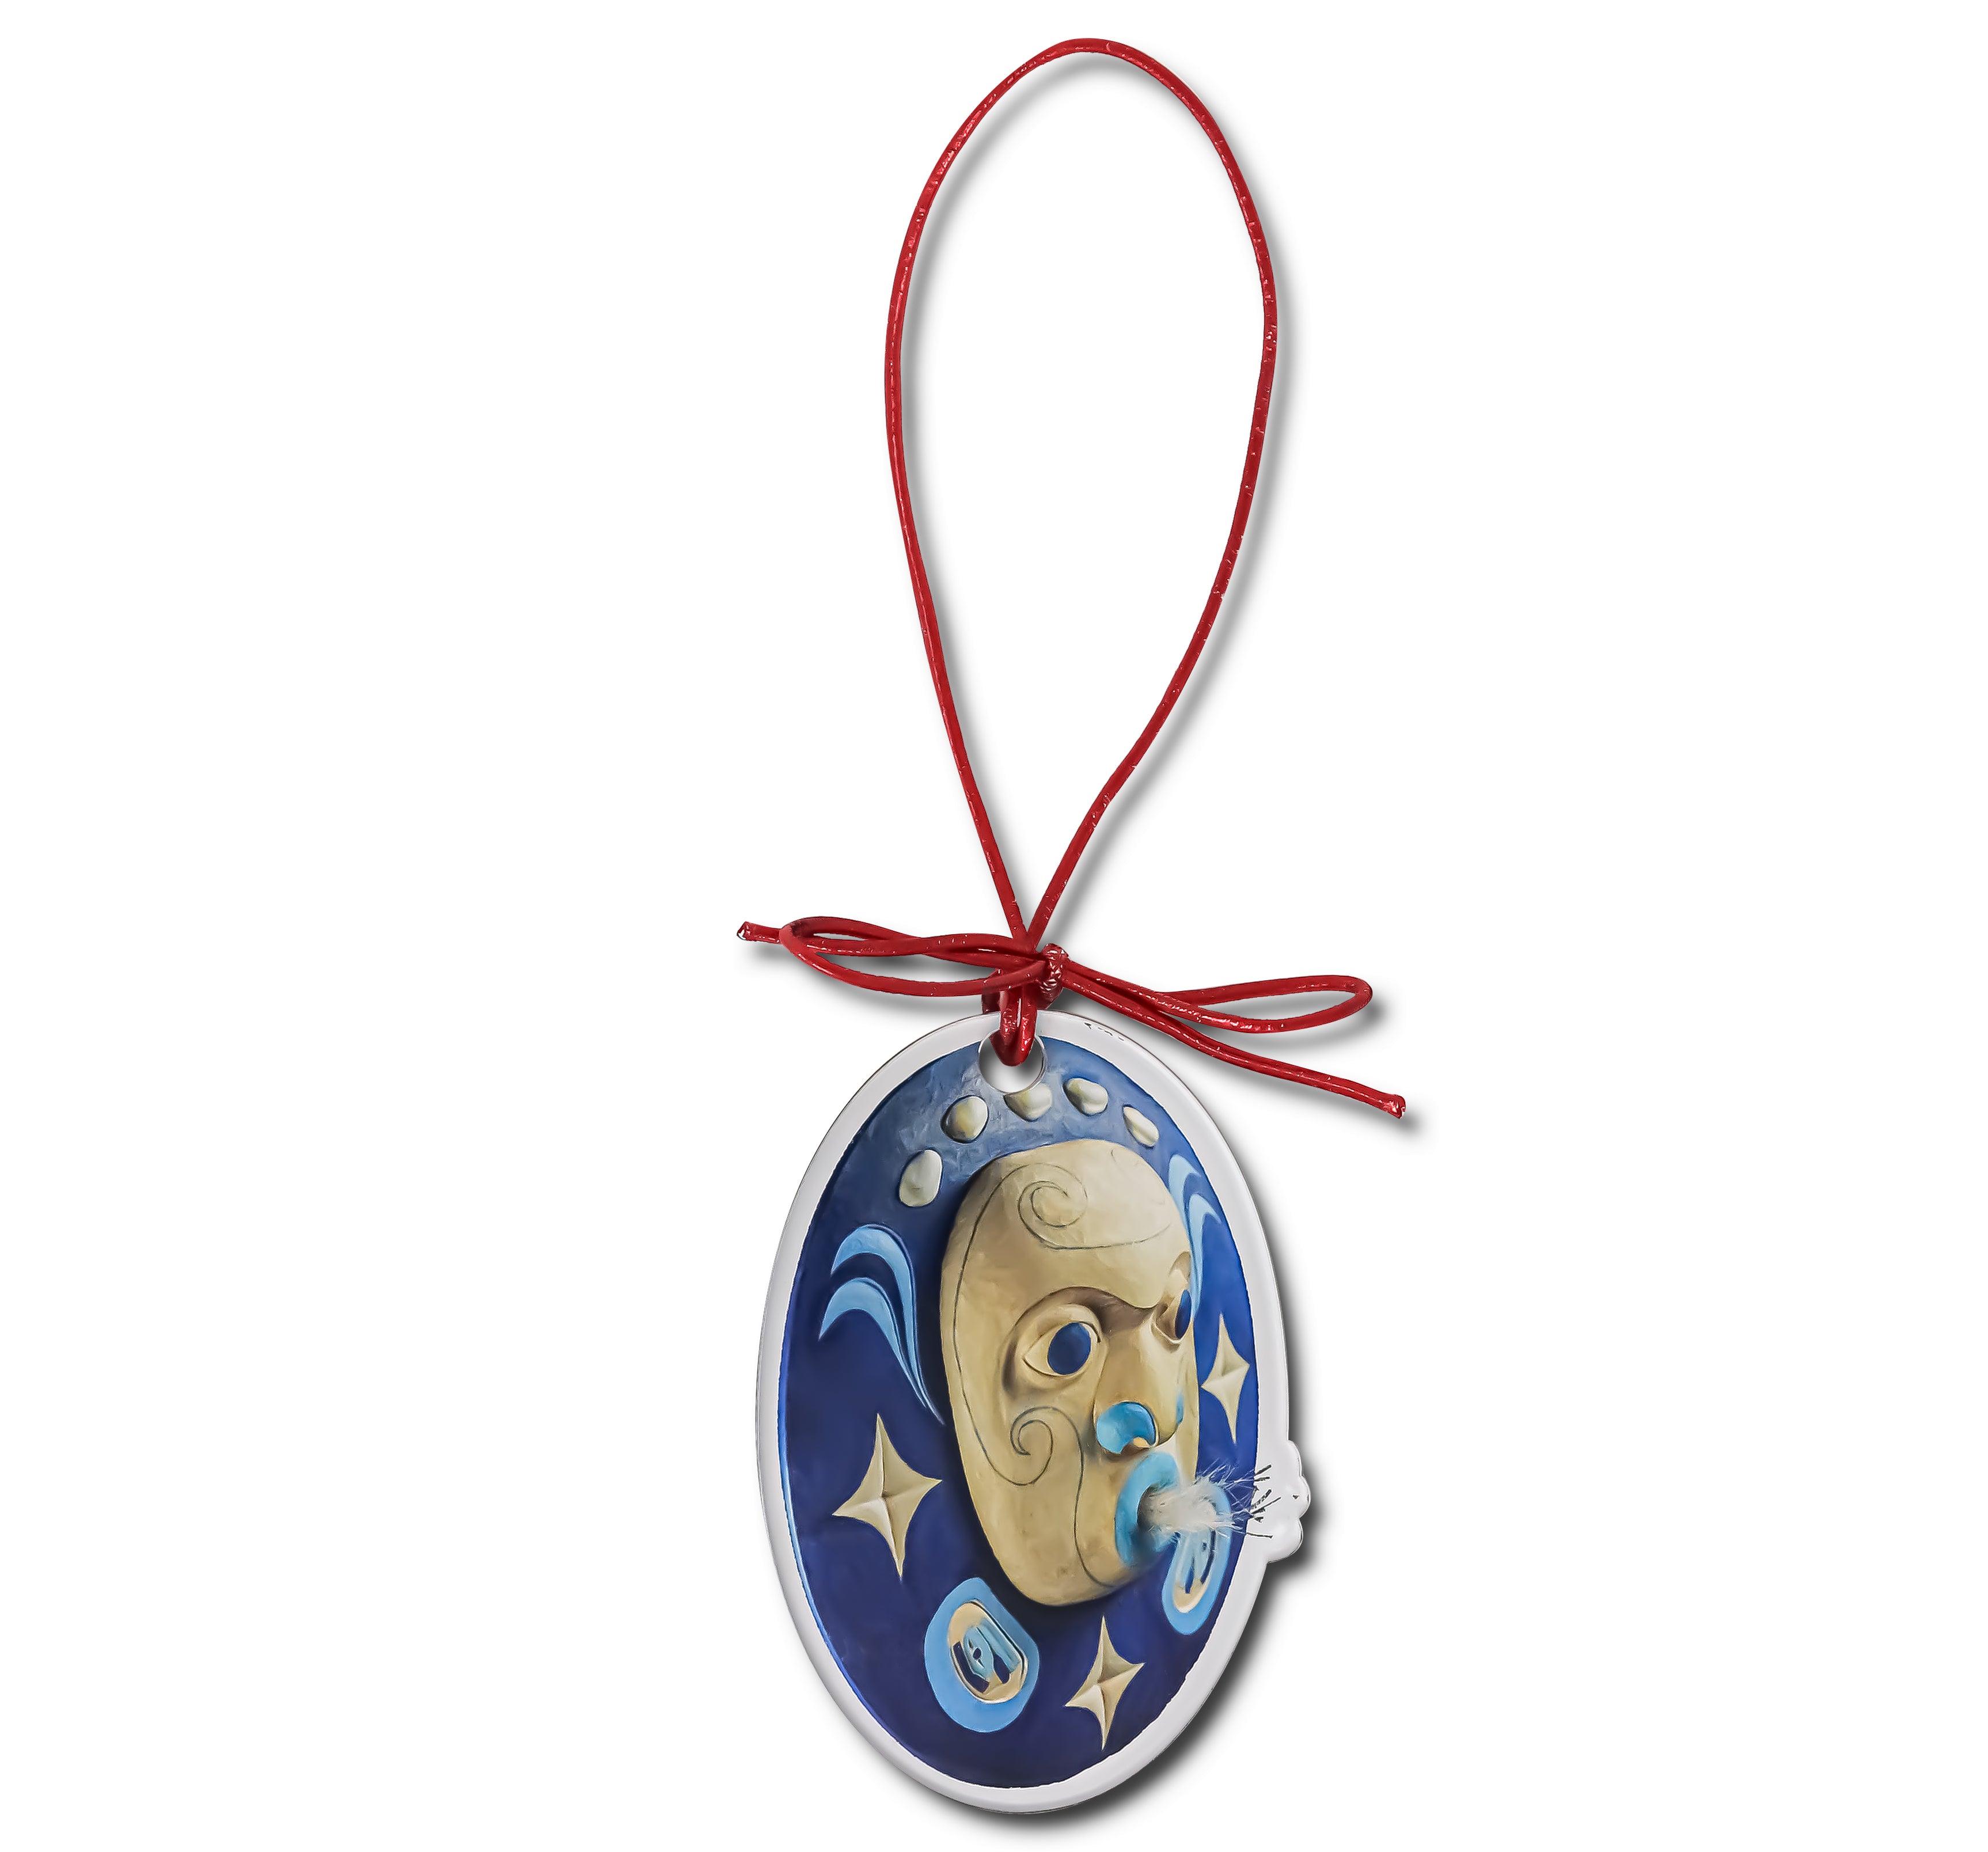 Glacierbay Winter Moon Mask Acrylic Holiday Tree Ornament originally carved and painted by Fred Fulmer Tlingit Artist